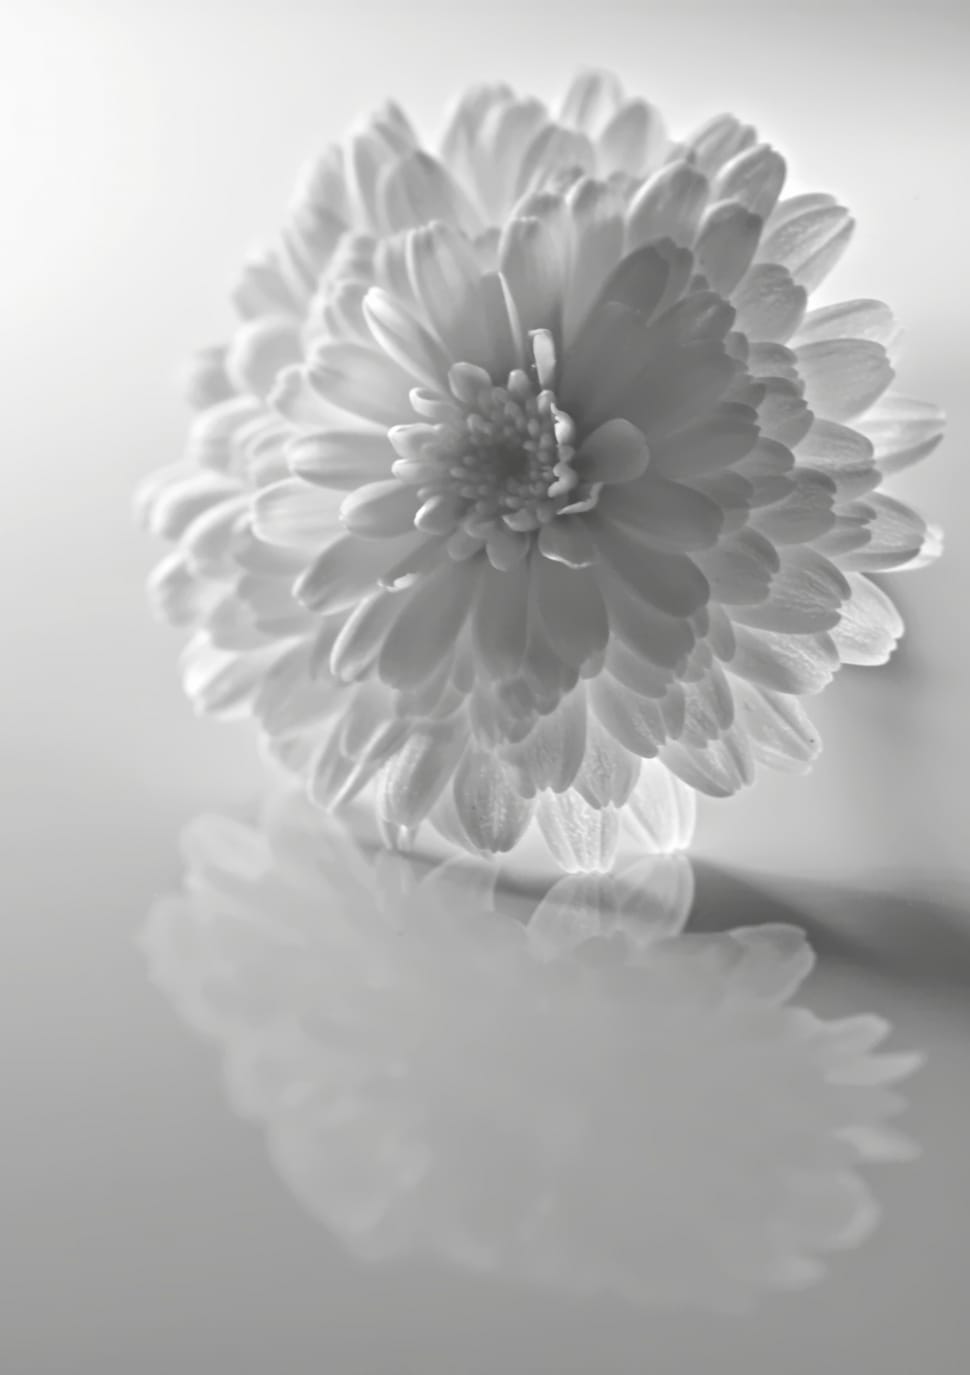 Blooms, Flower, Black And White, Shadows, flower, studio shot preview